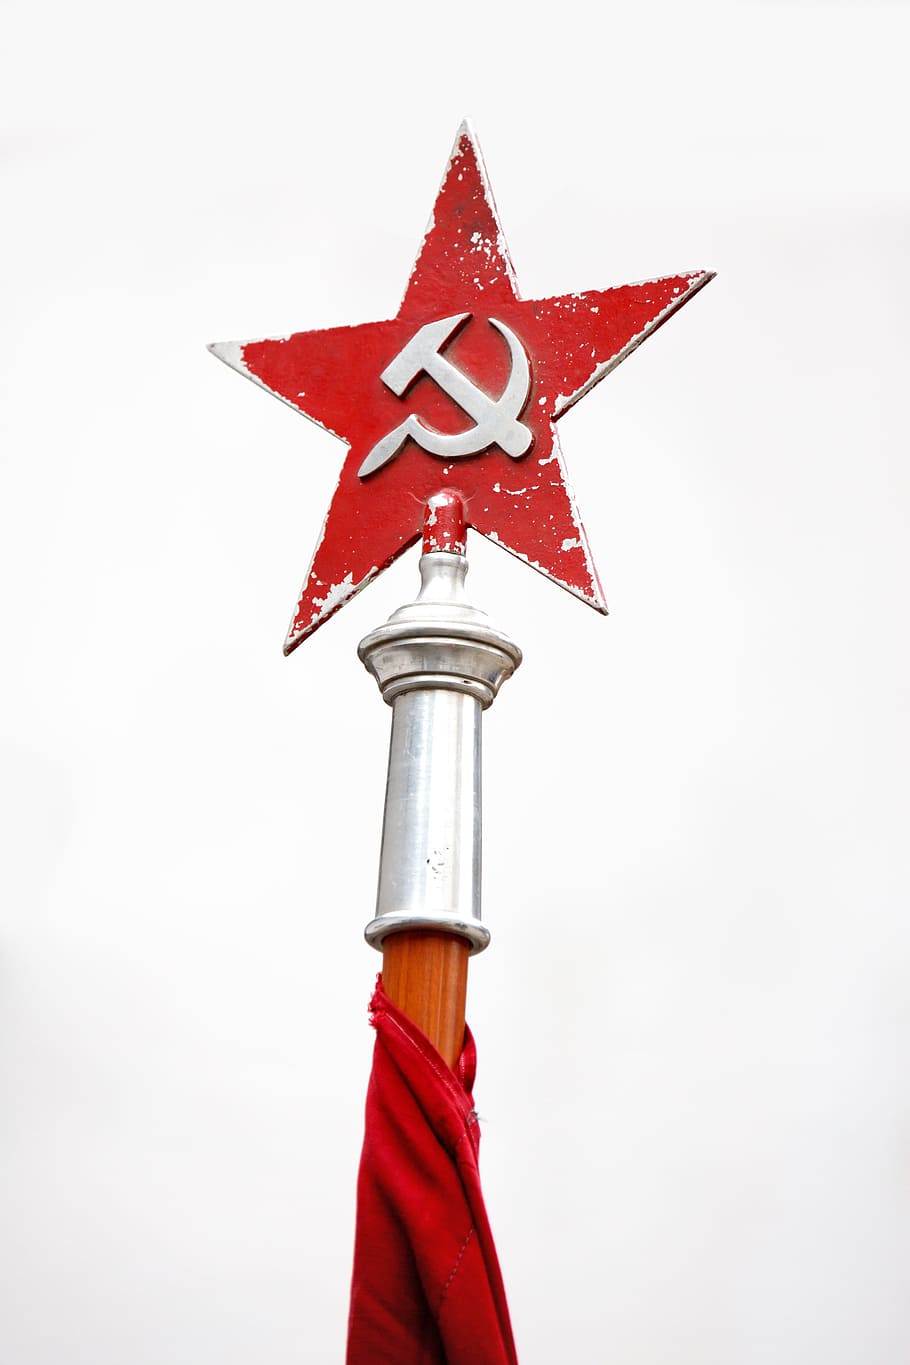 red star with sickle and hammer pole, Communism, Communist, Moscow